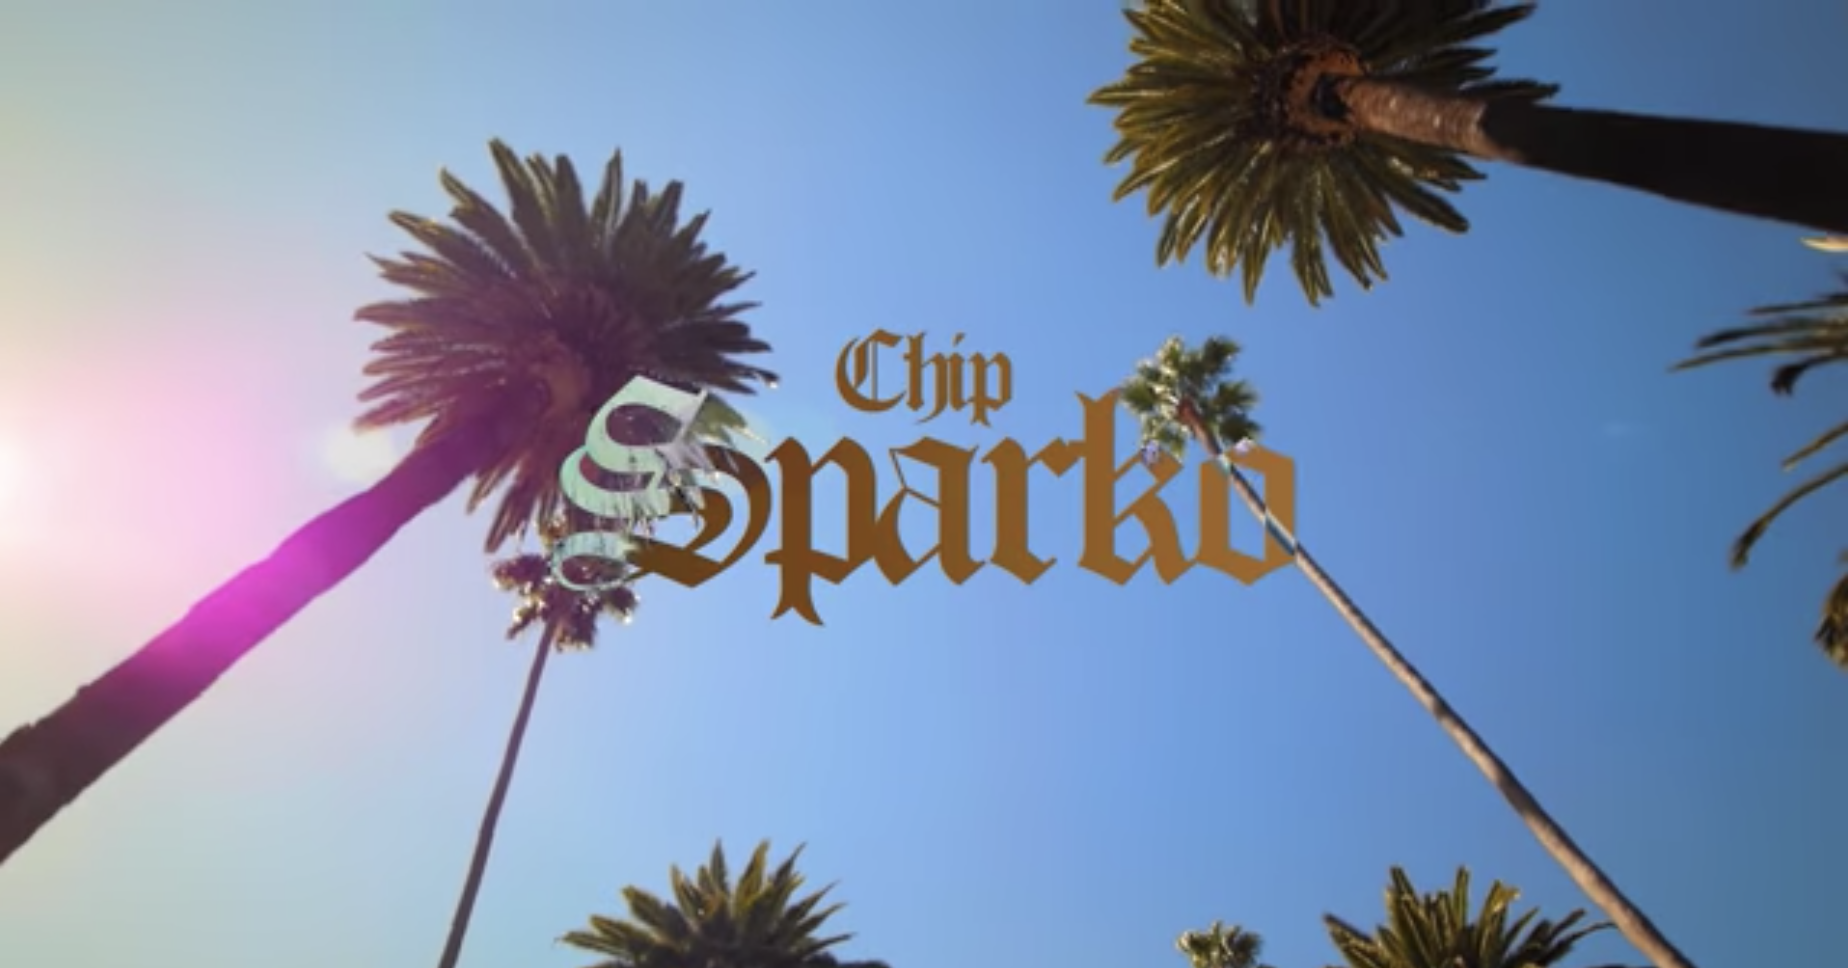 Chip Drops Birthday Joint ‘Sparko’